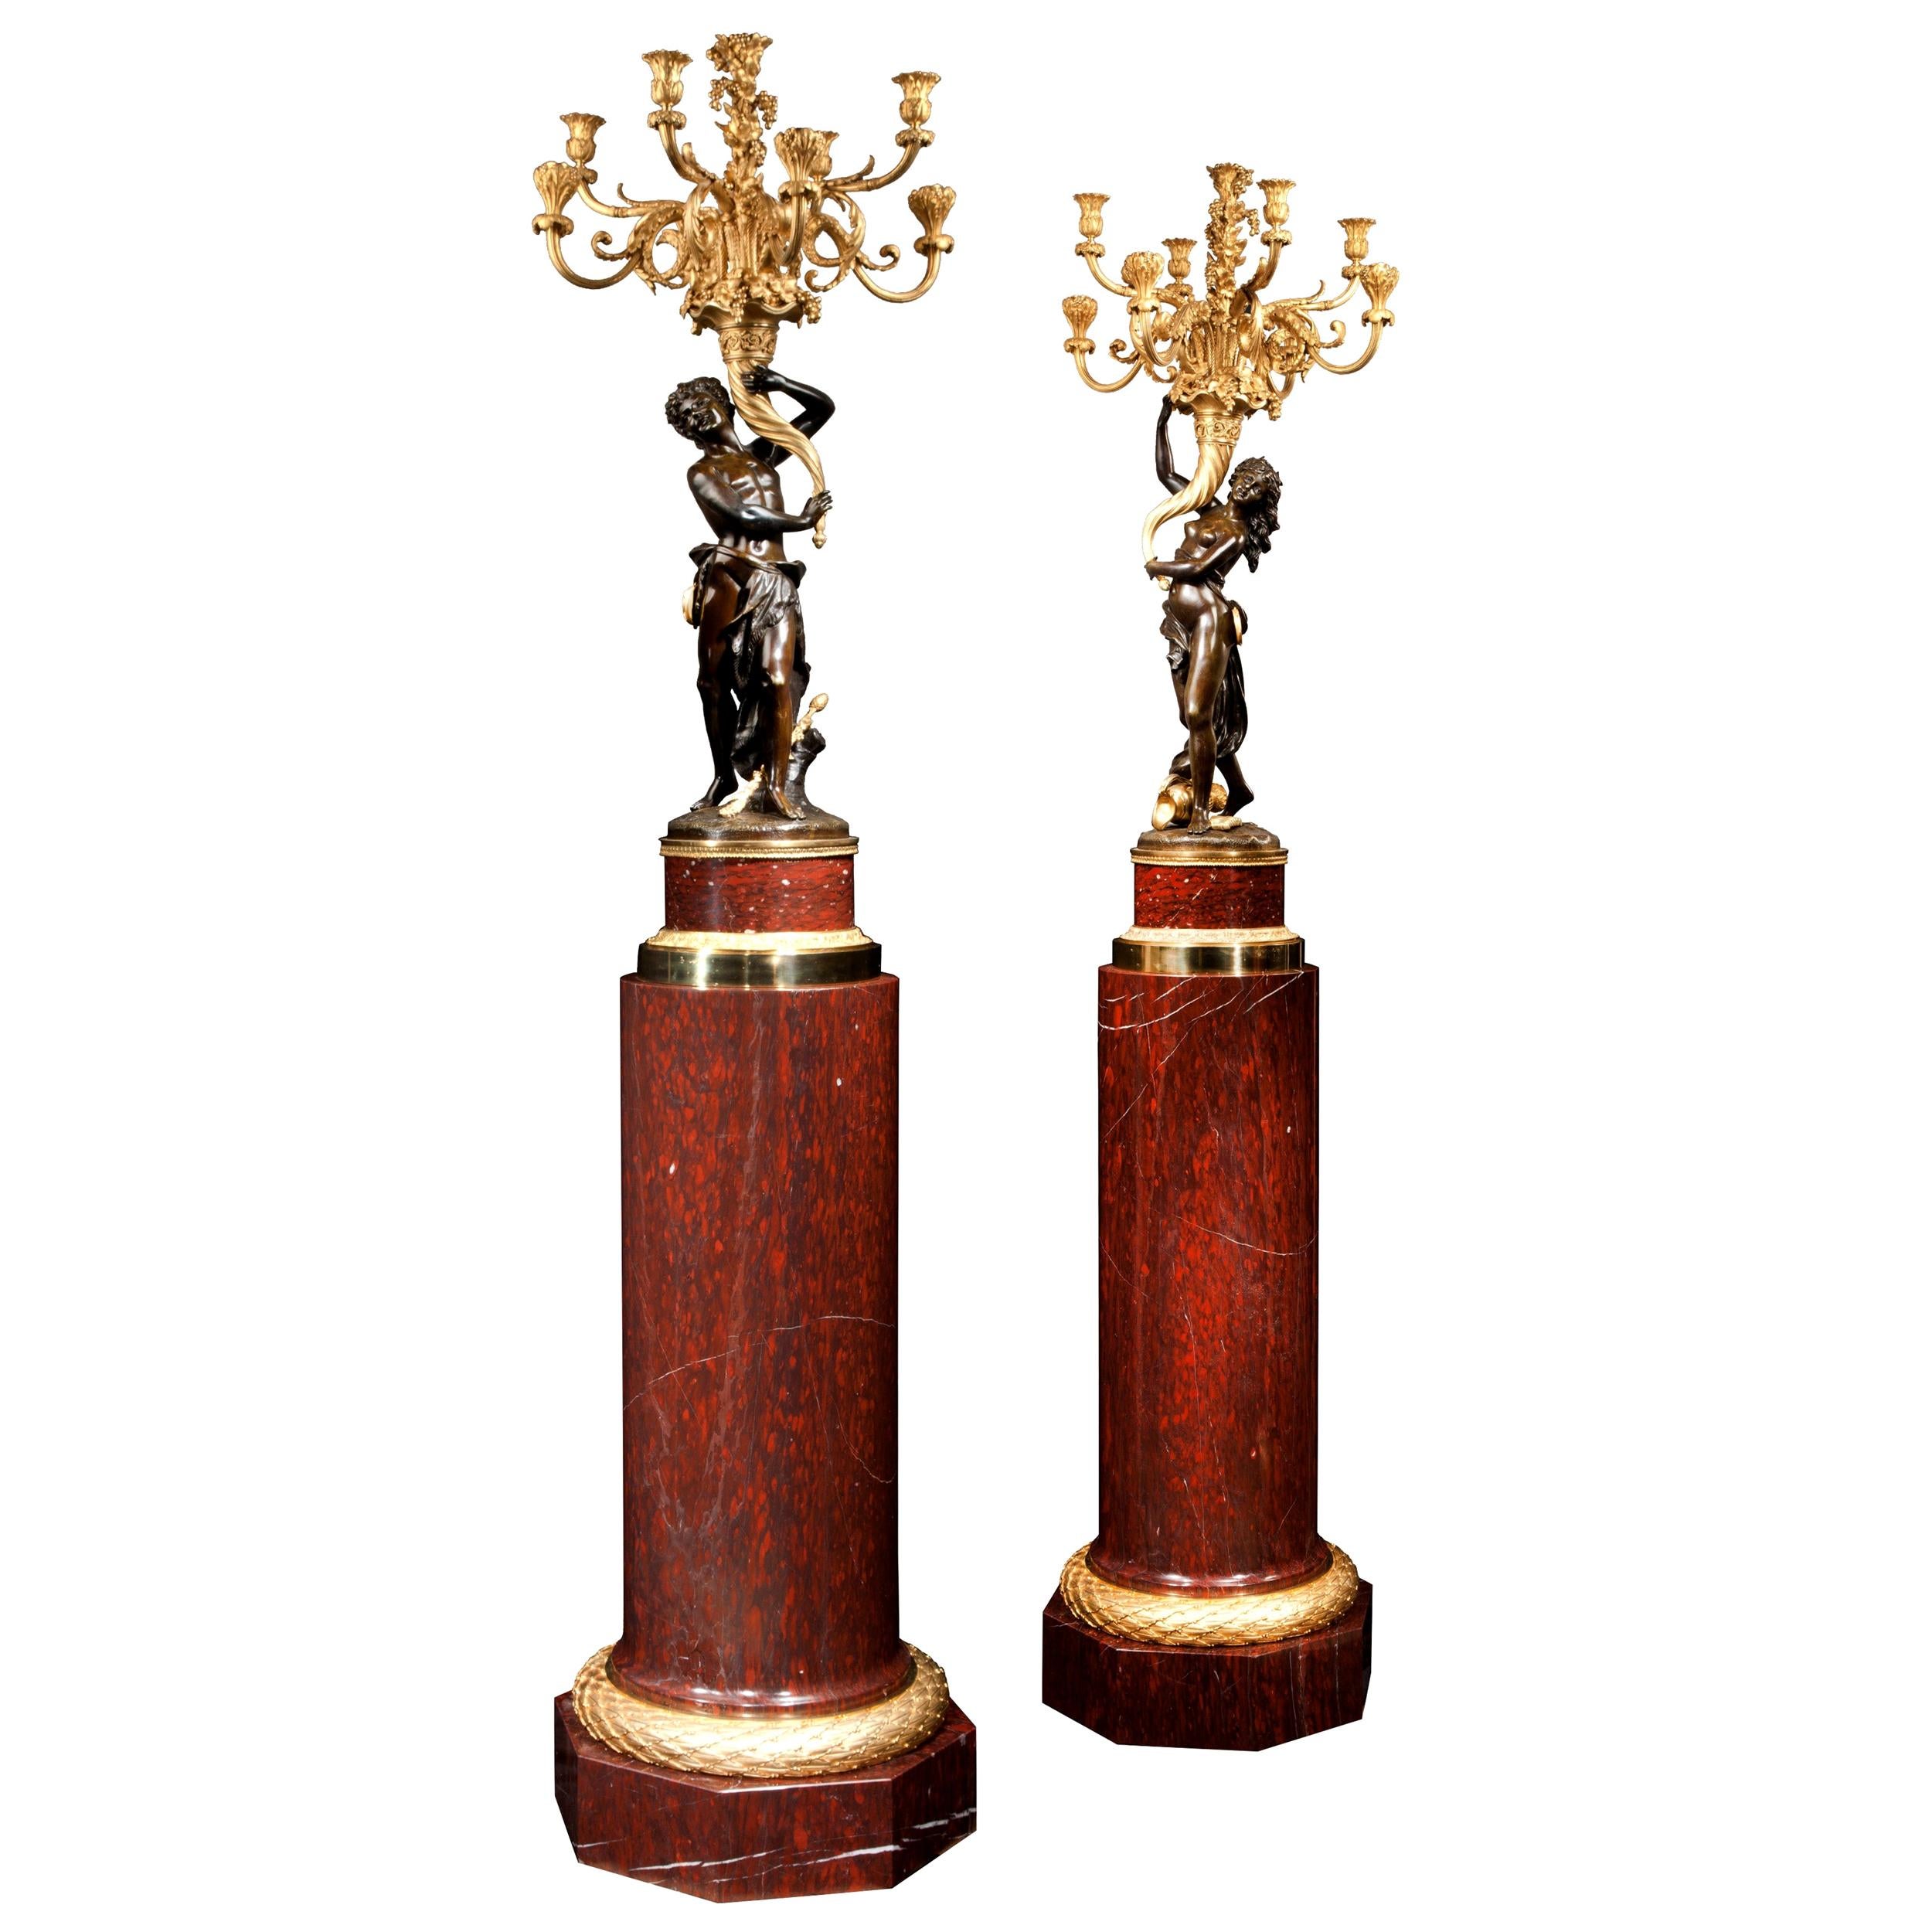 Magnificent Pair of Louis XVI Candelabra after Clodion For Sale